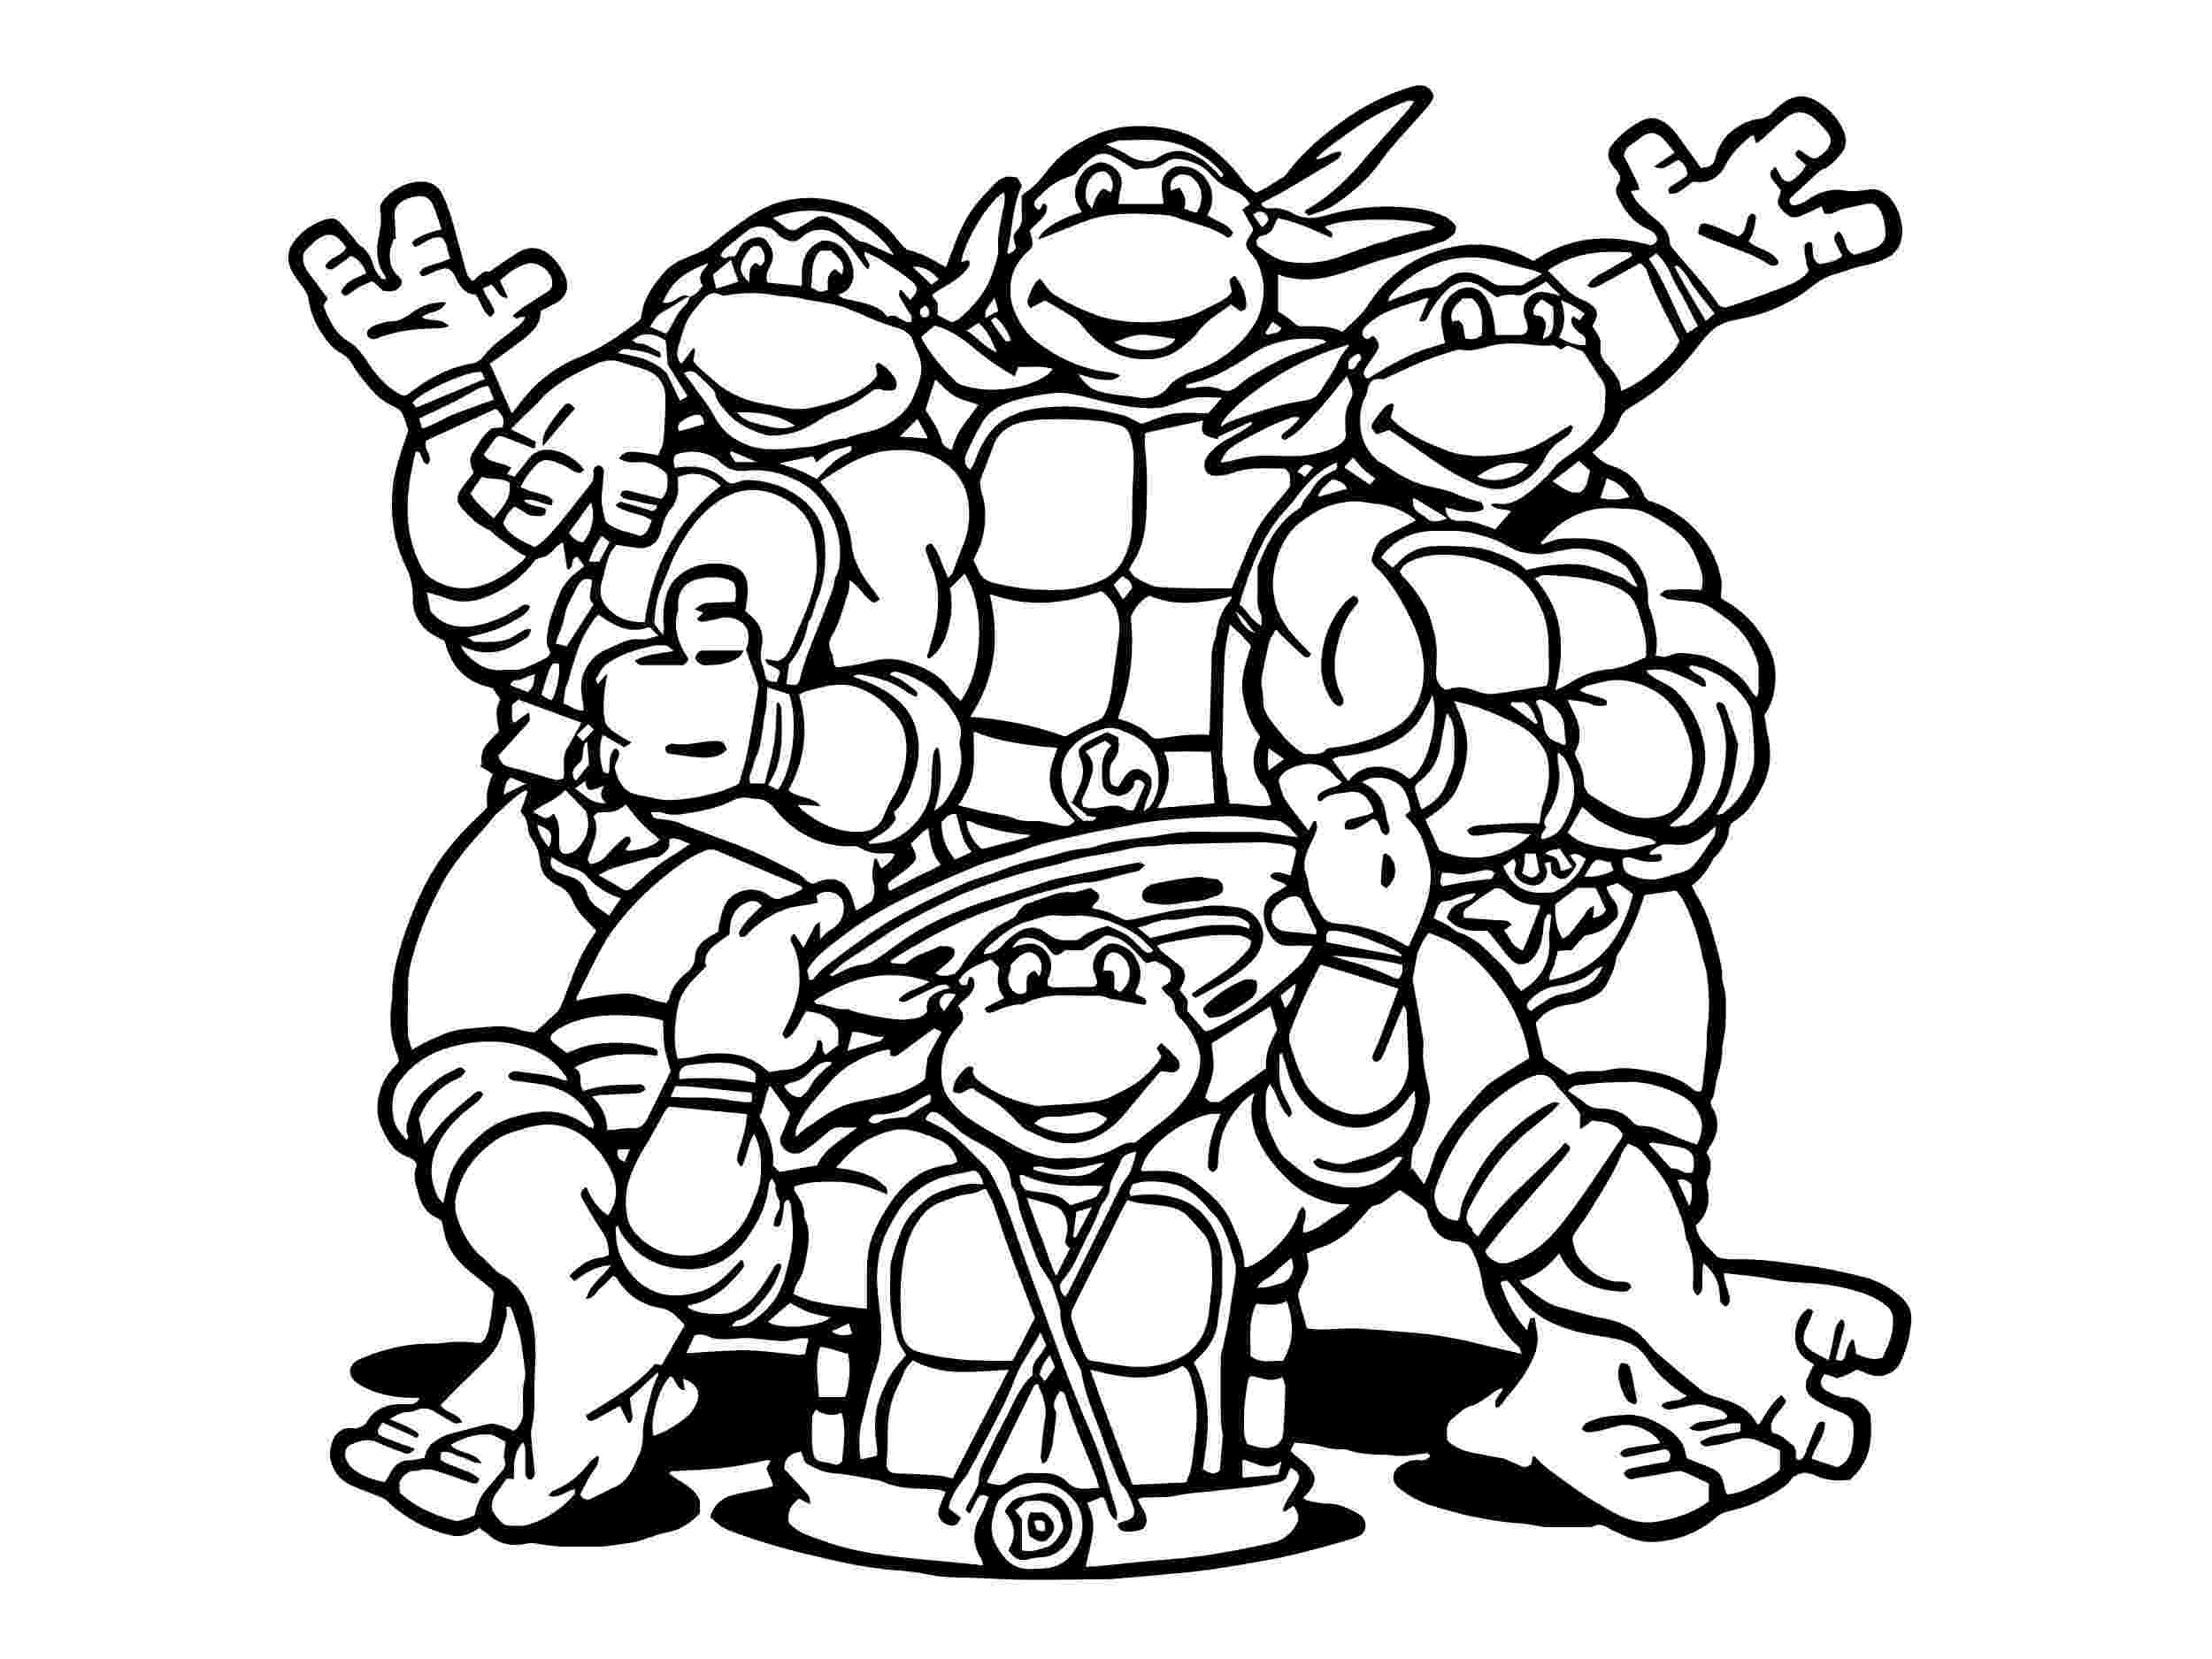 ninja turtles pictures to color teenage mutant ninja turtles coloring pages ninja turtle turtles to color ninja pictures 